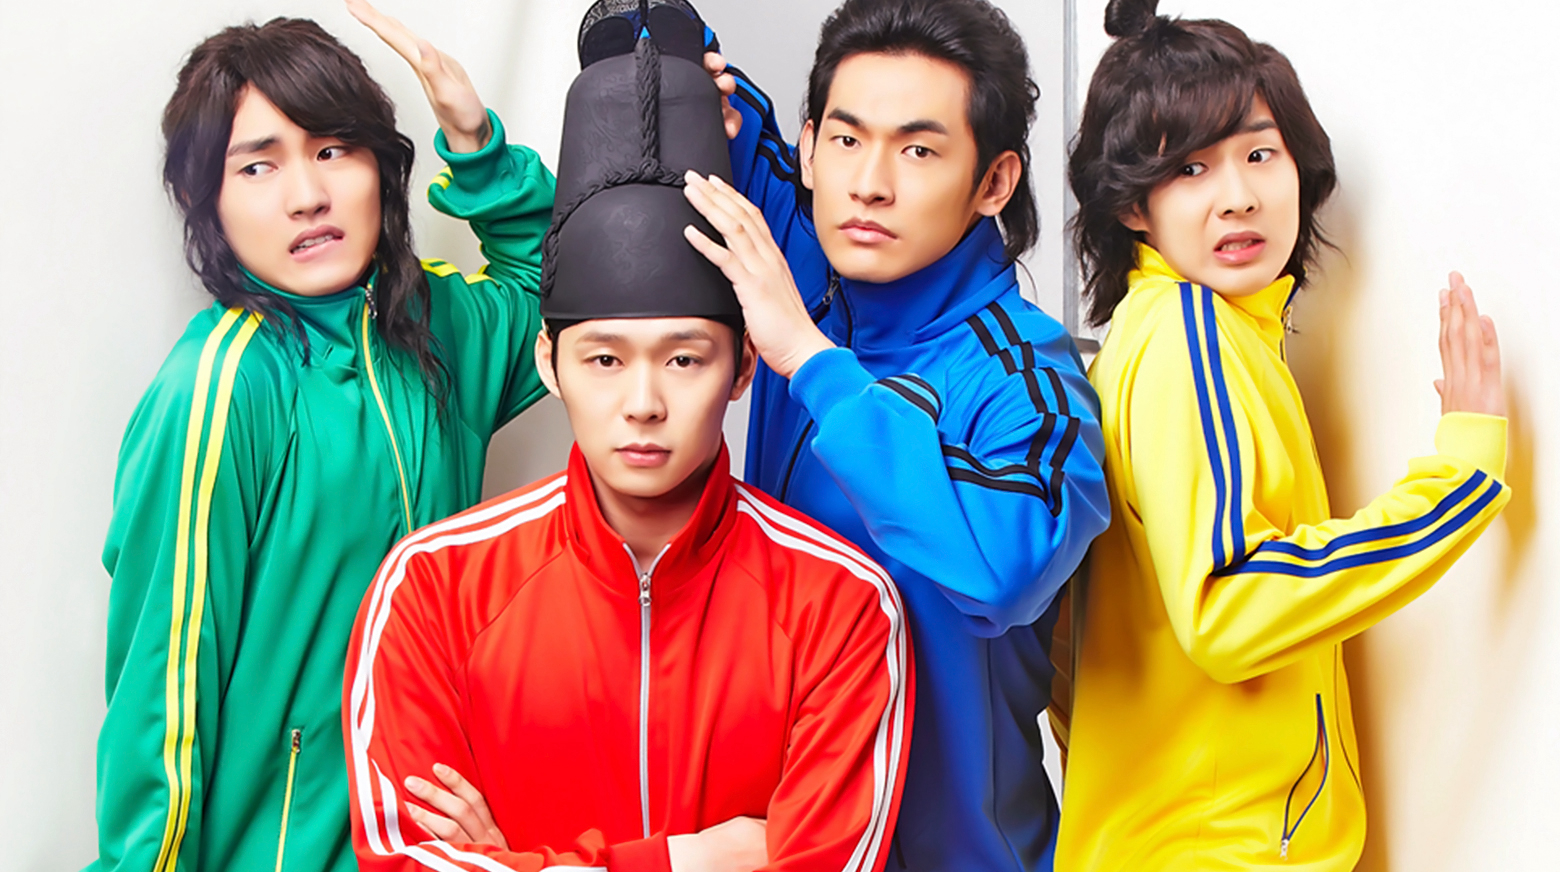 Rooftop Prince / Rooftop Prince (2012)